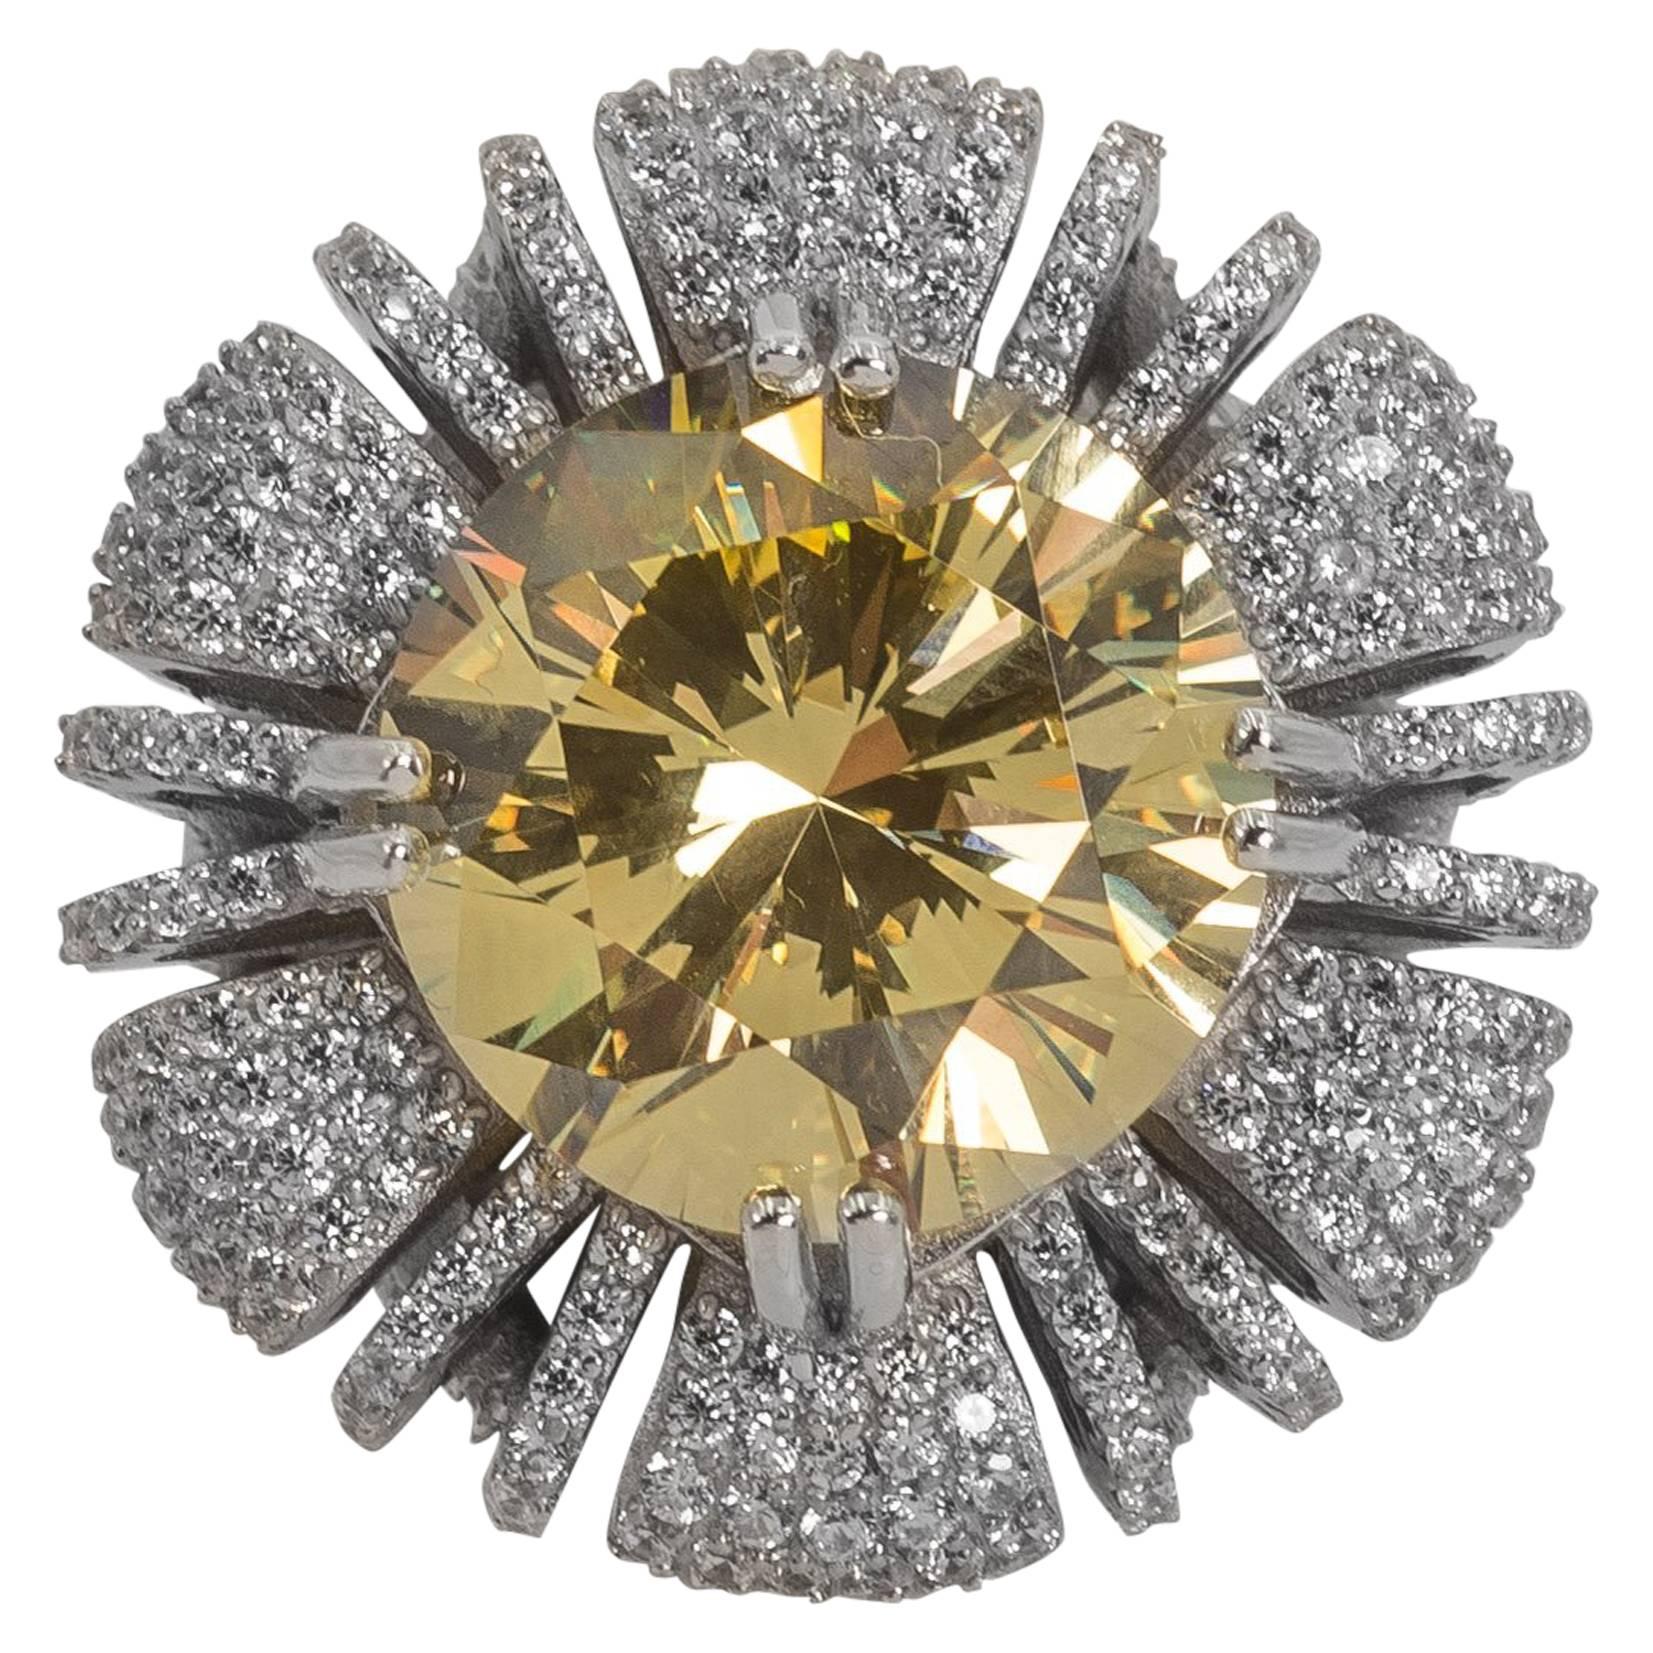 A 15 carat hand special cut round fancy canary yellow cubic zirconia nestled on a cushion pave white faux diamonds set in sterling designed to the highest fine standards possible. A classic amazing sparkly and brilliant look that will last forever.